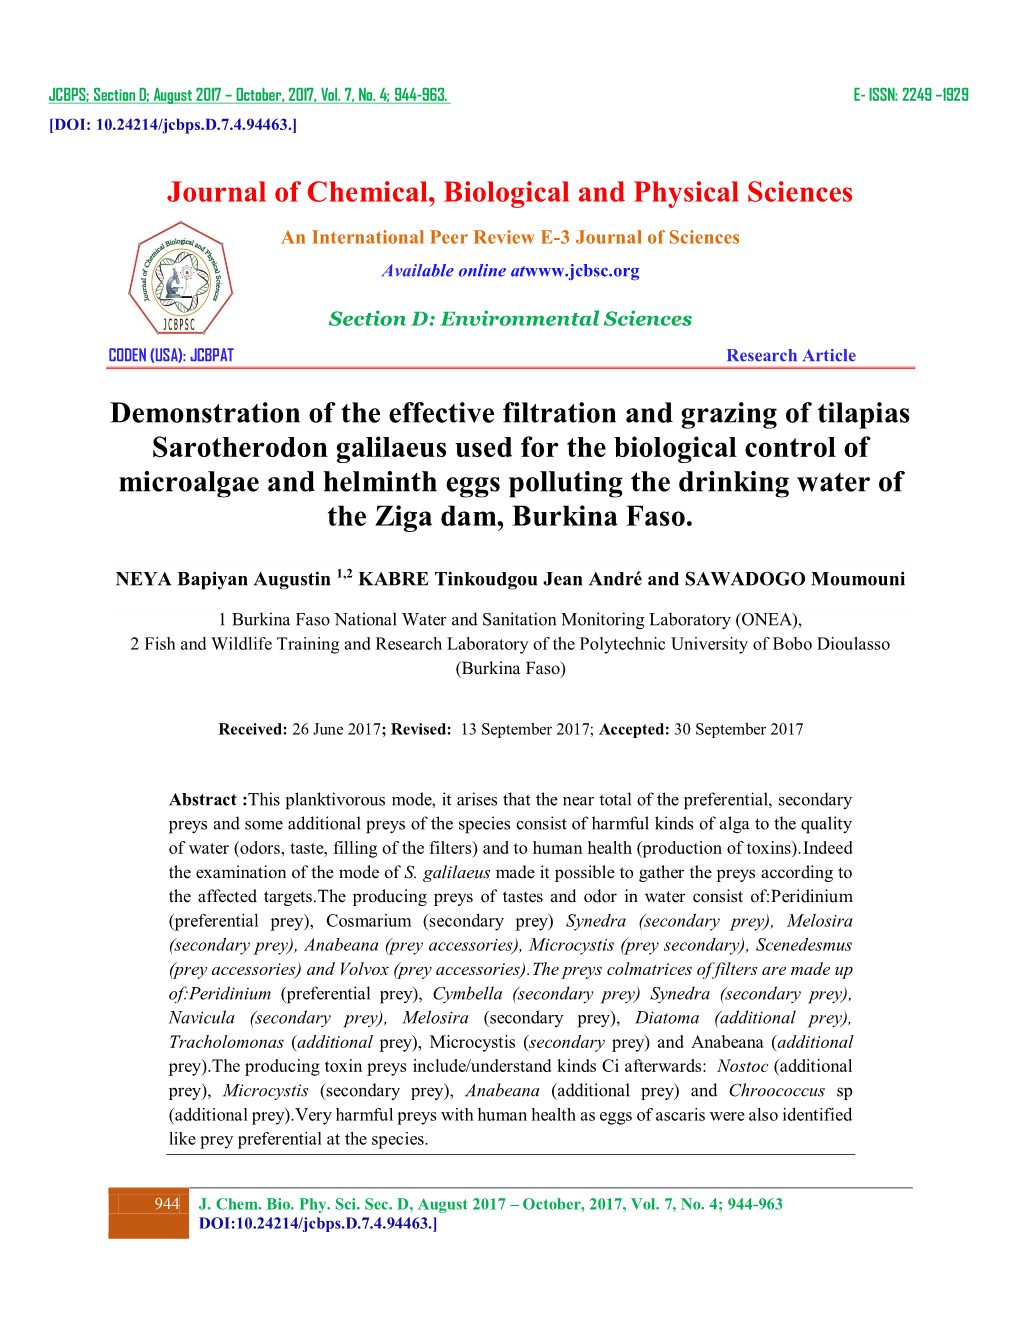 Journal of Chemical, Biological and Physical Sciences Demonstration of the Effective Filtration and Grazing of Tilapias Sarother